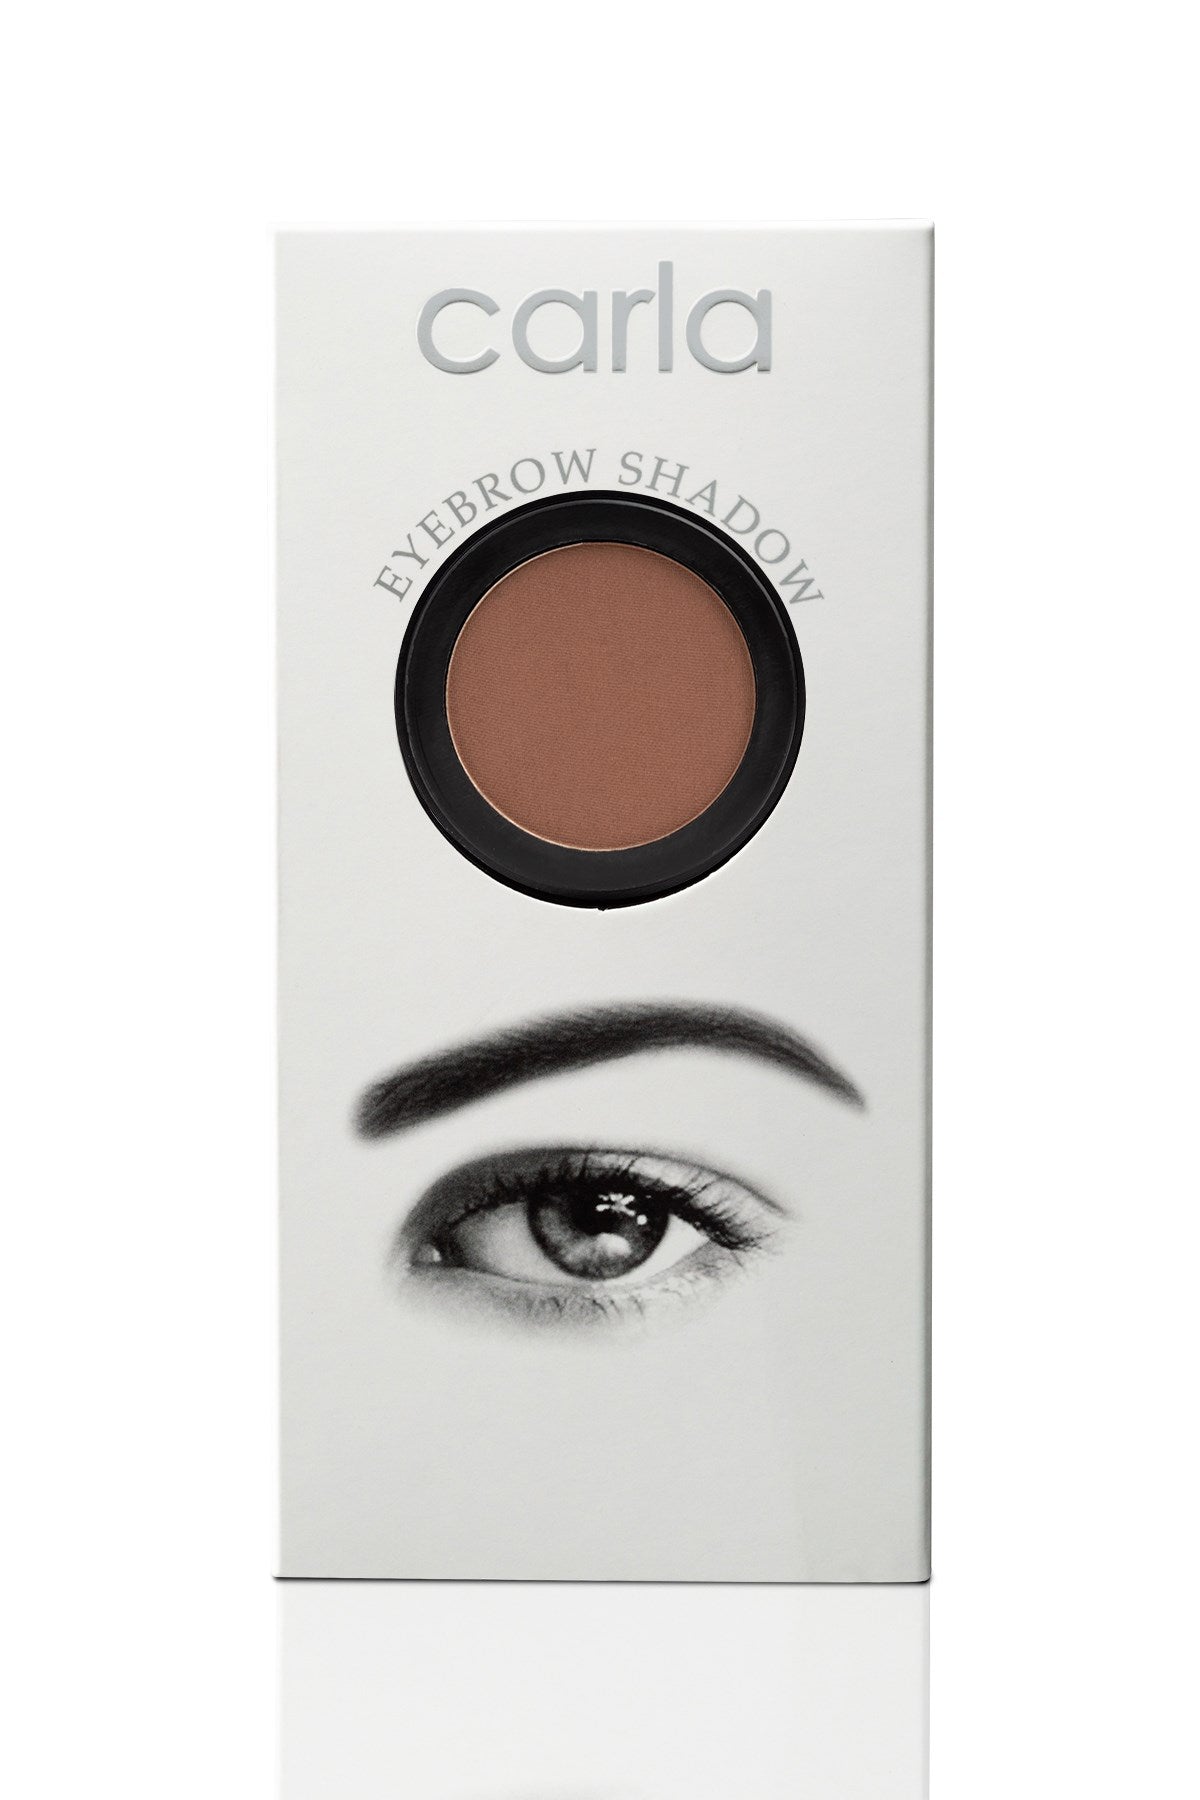 Carla Eyebrow Shadow - Shade: Light Brown (No: 03) - Define and Perfect Your Brows!